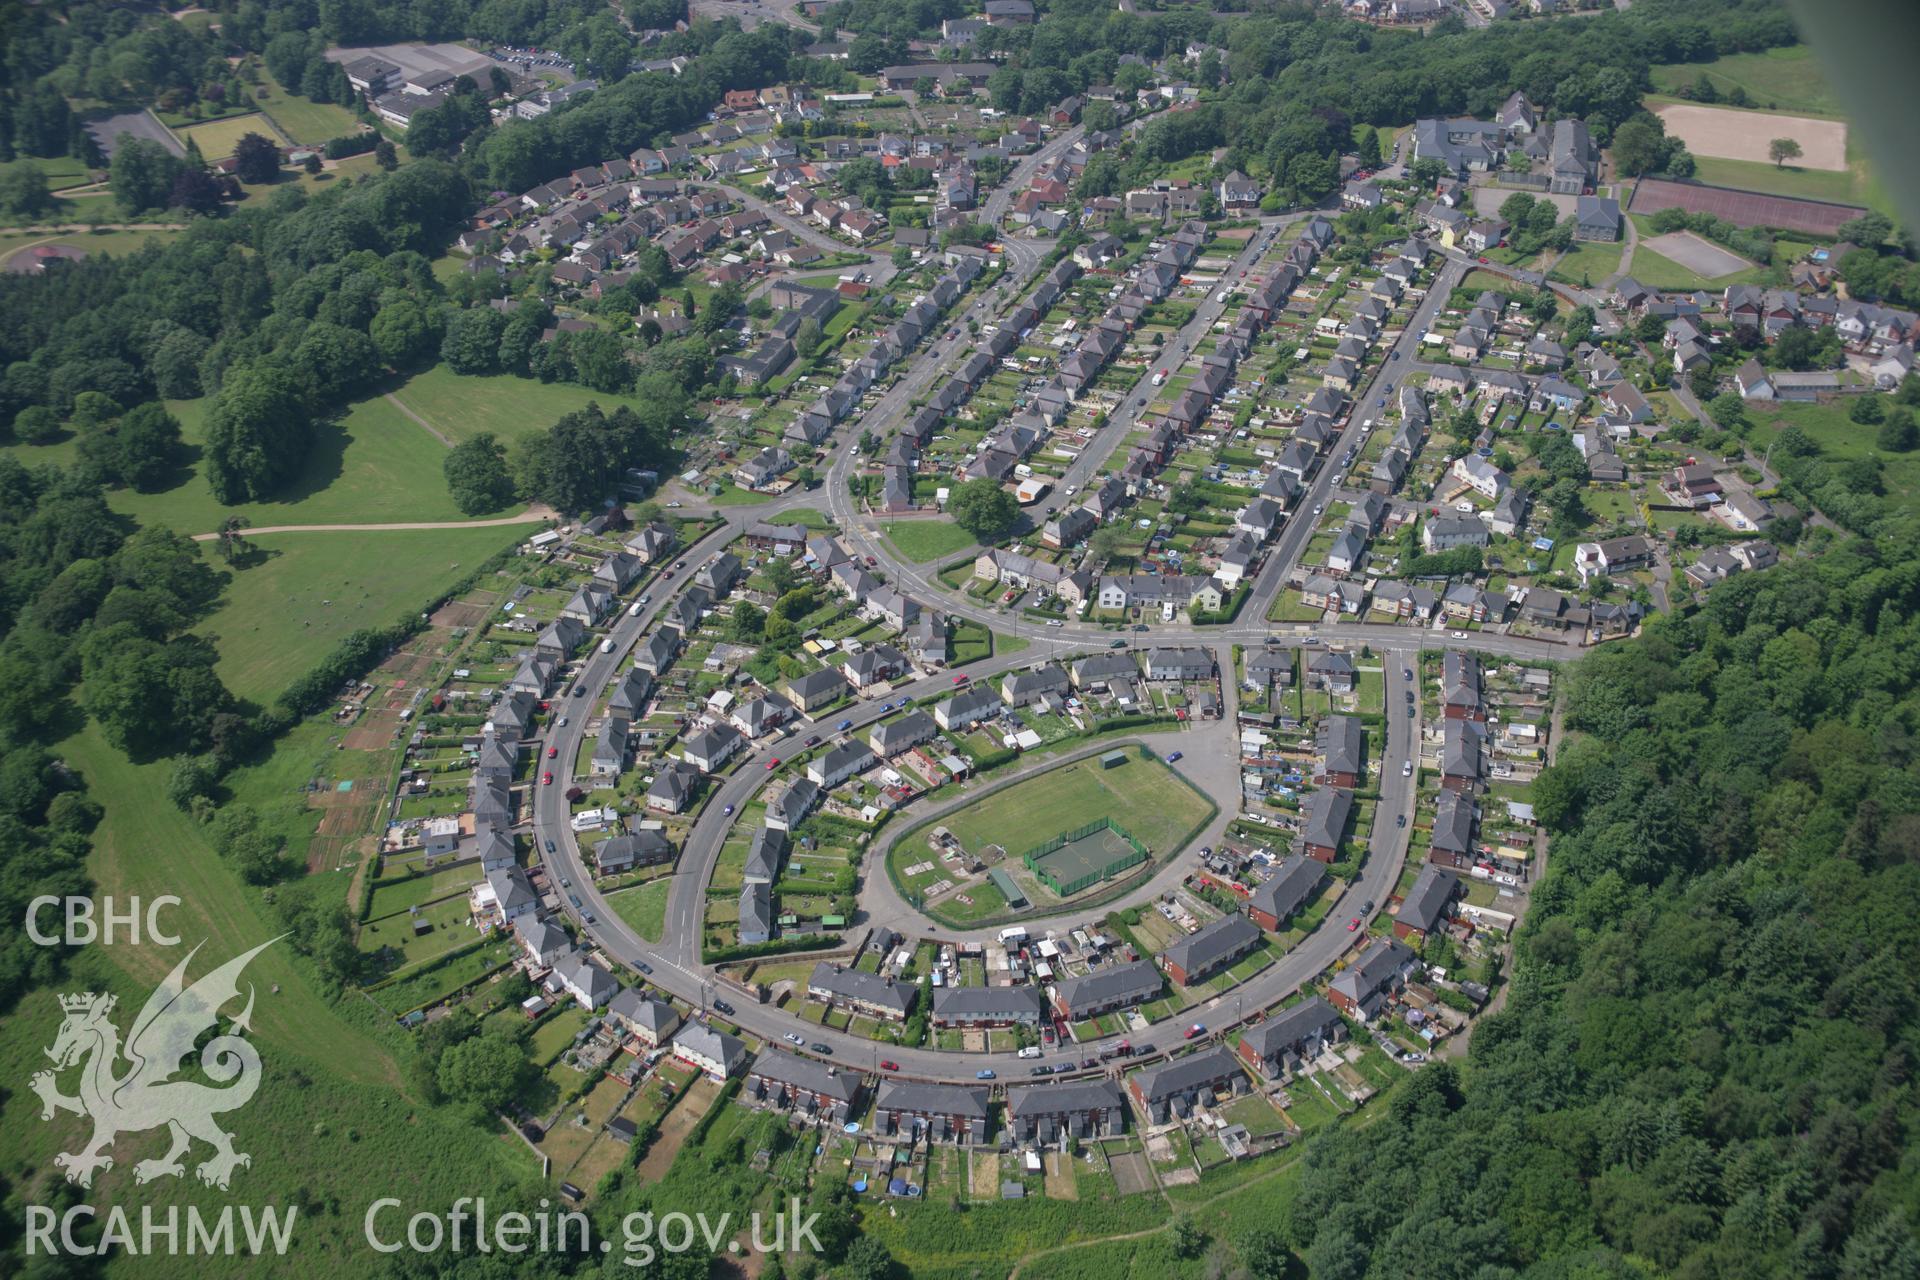 RCAHMW colour oblique aerial photograph of Pontypool from the north-east showing housing at Penygarn Taken on 09 June 2006 by Toby Driver.